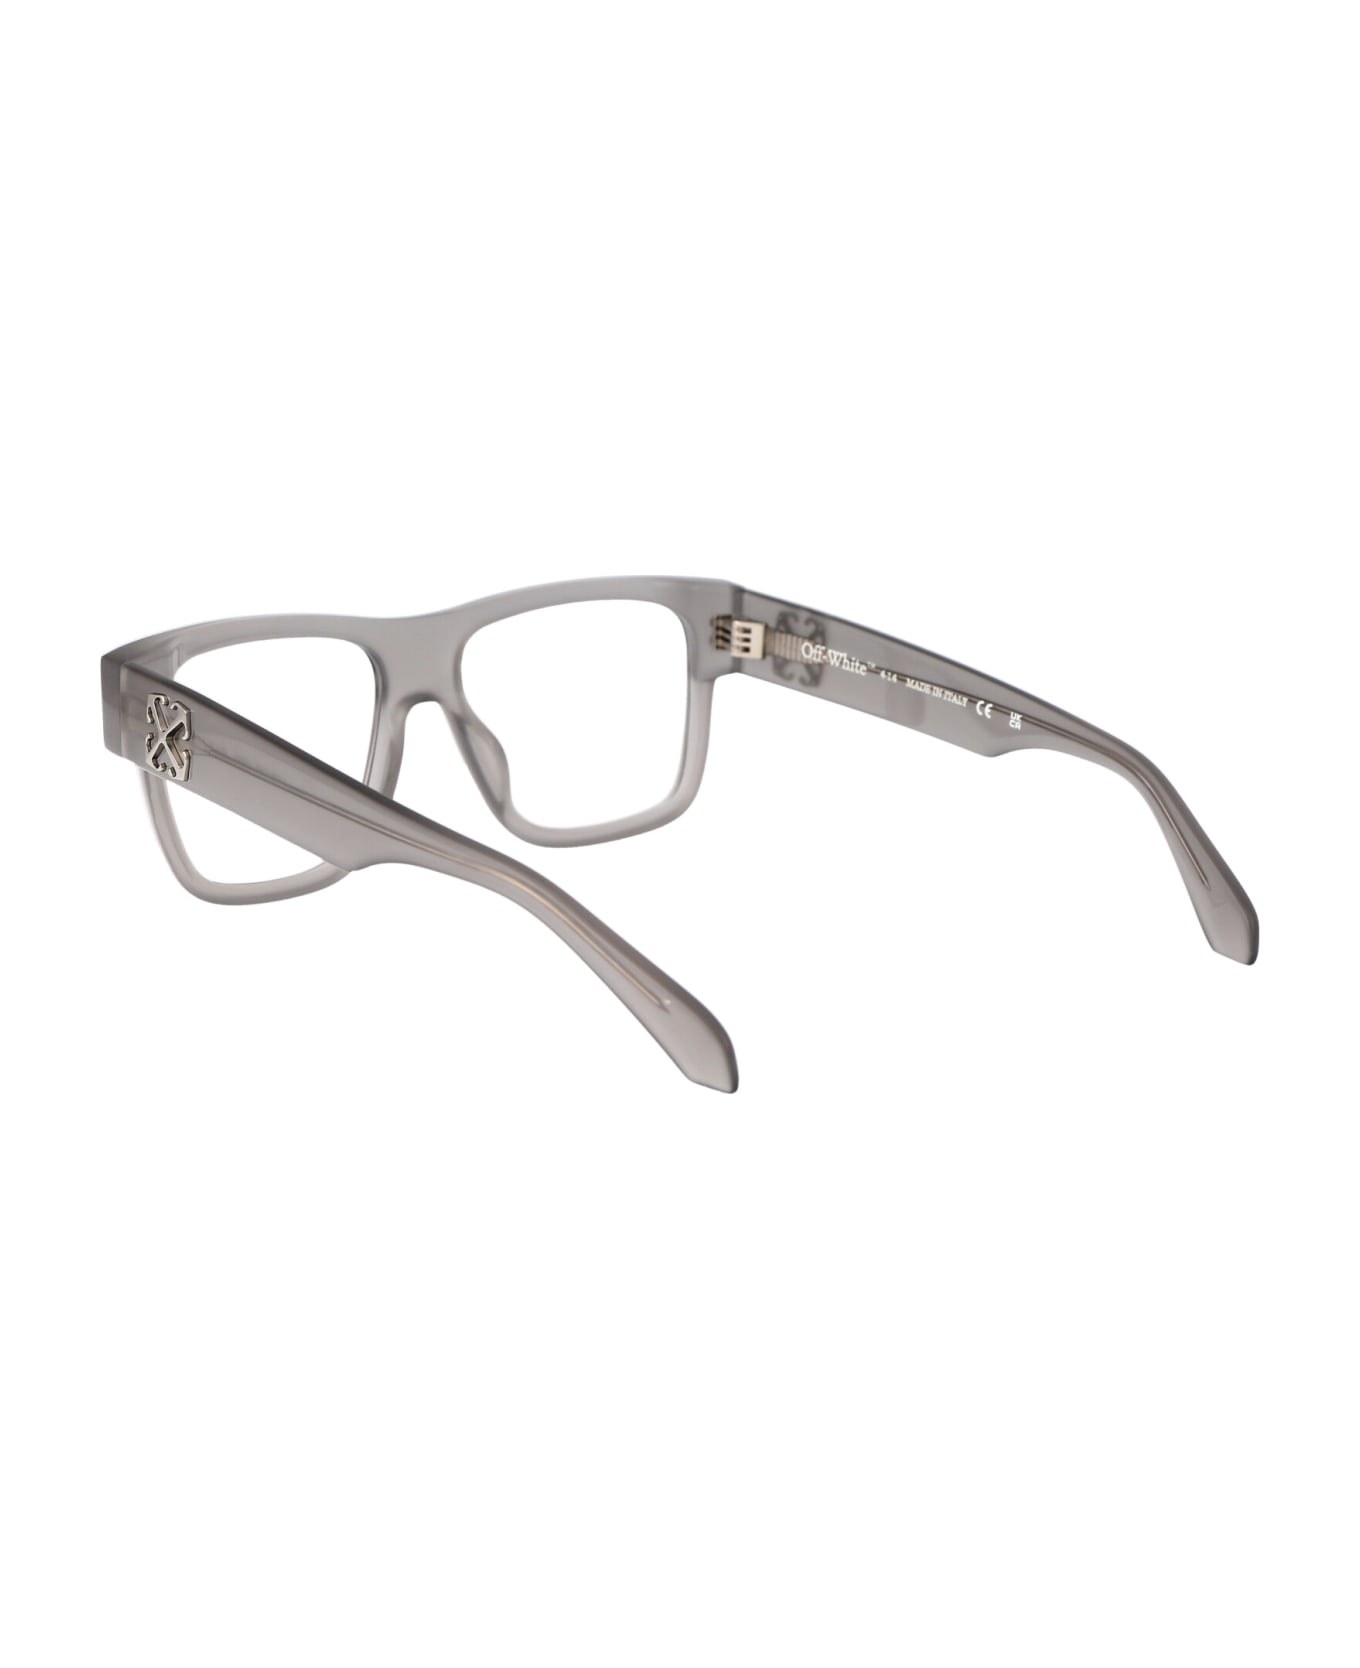 Off-White Optical Style 60 Glasses - 0900 GREY 